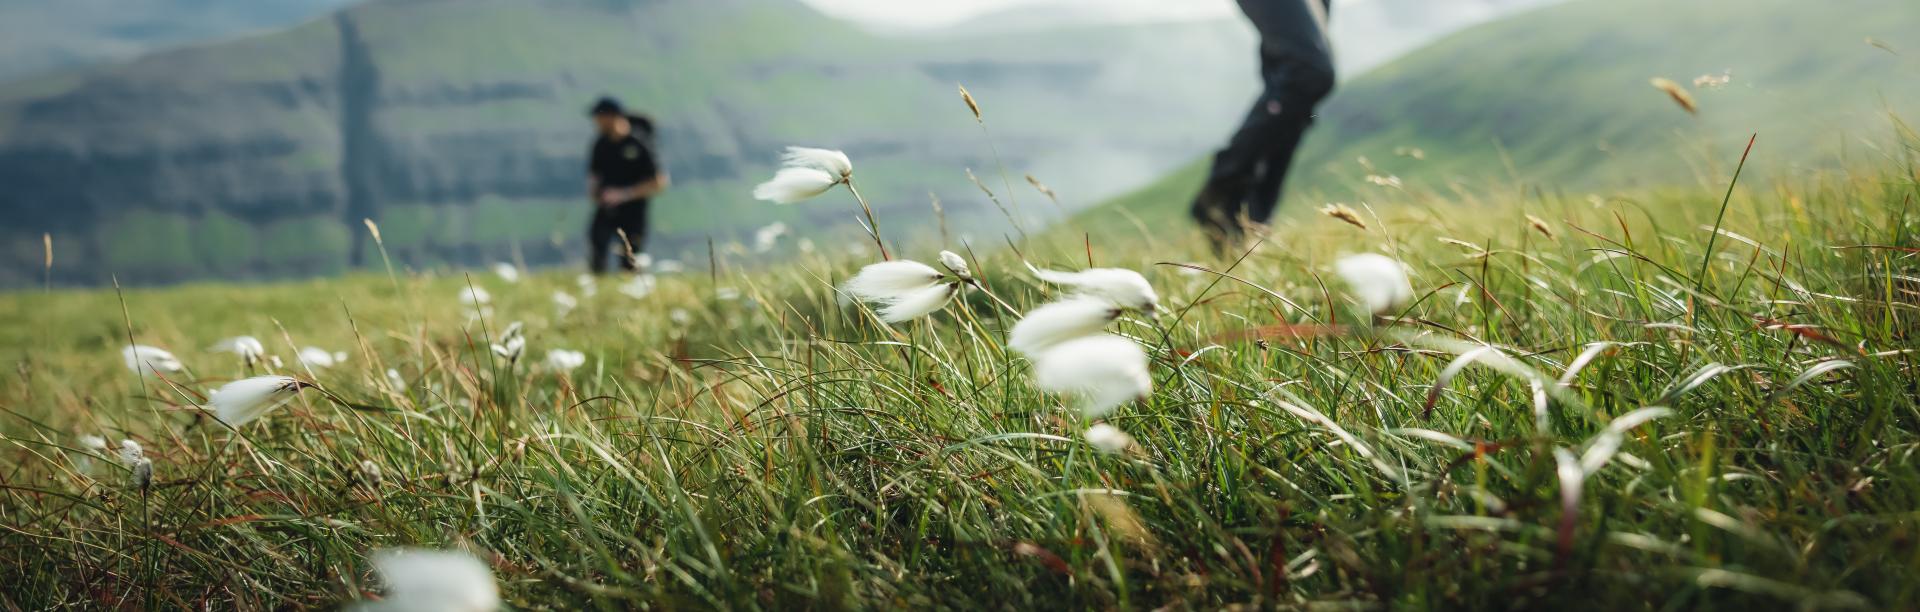 Thumbnail of - Hiking in the Faroe Islands, nature and beautiful landscapes. image by Thrainn Kolbeinsson